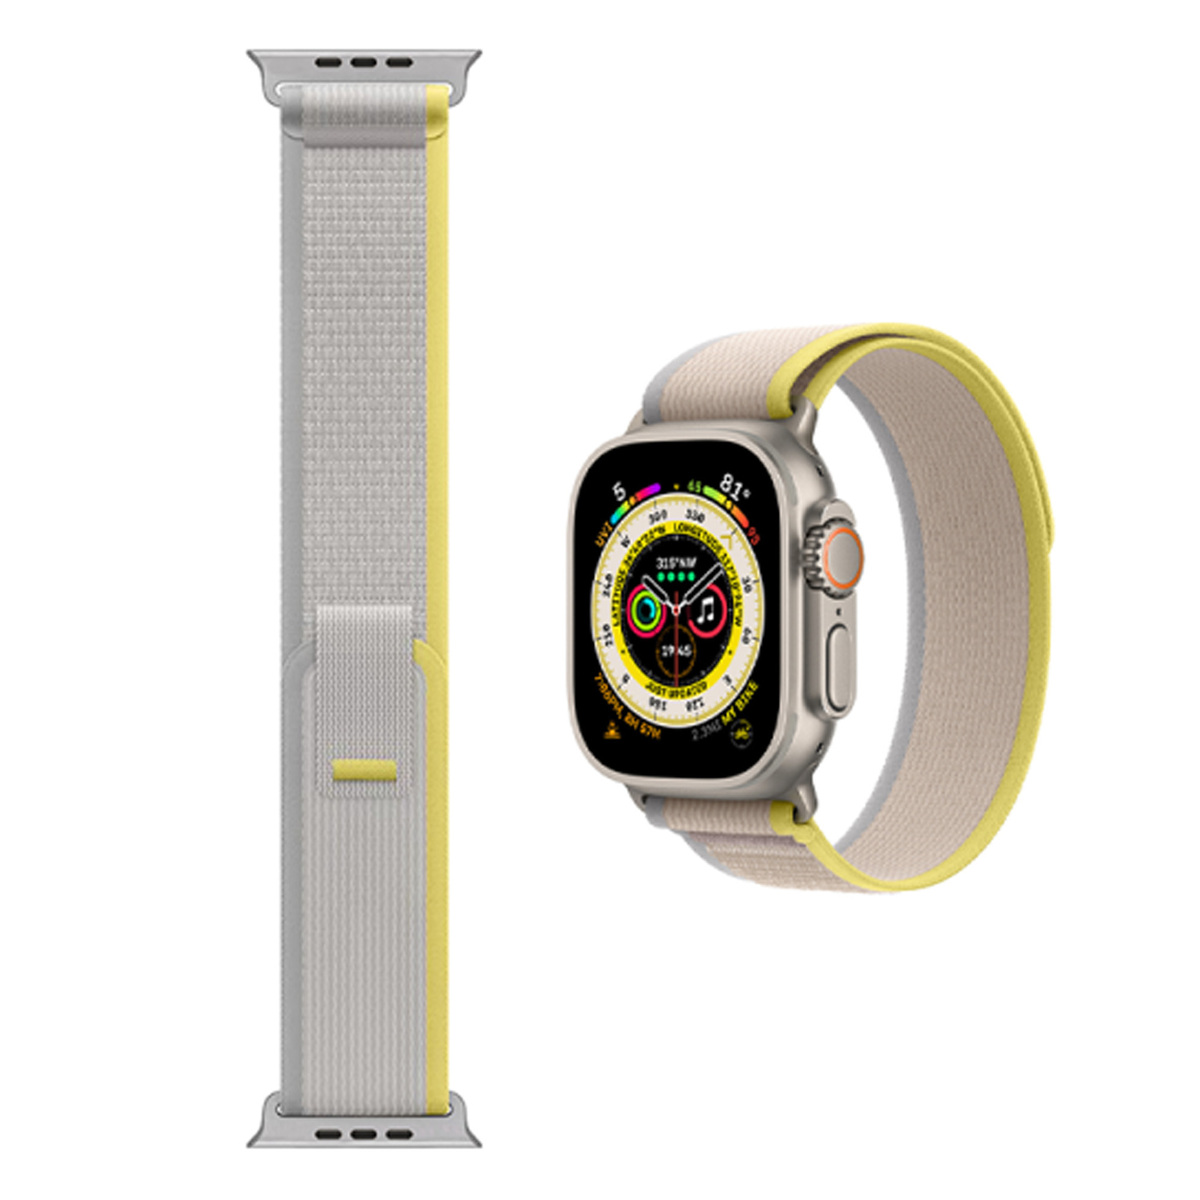 Wiwu Trail Loop Watch Band for iWatch 42-49 mm, Yellow/Ivory, STRAP209